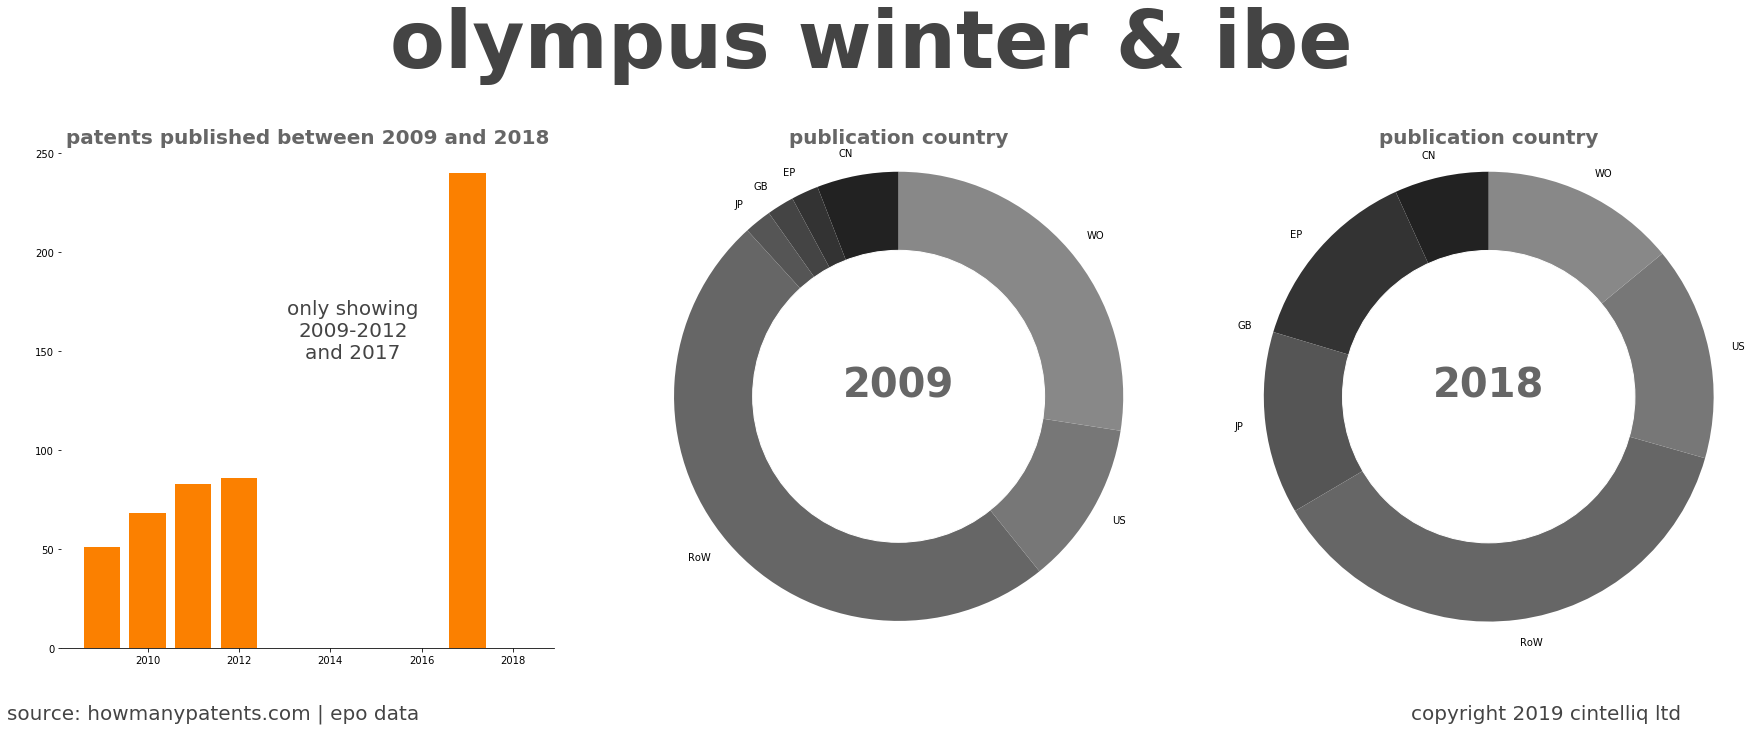 summary of patents for Olympus Winter & Ibe